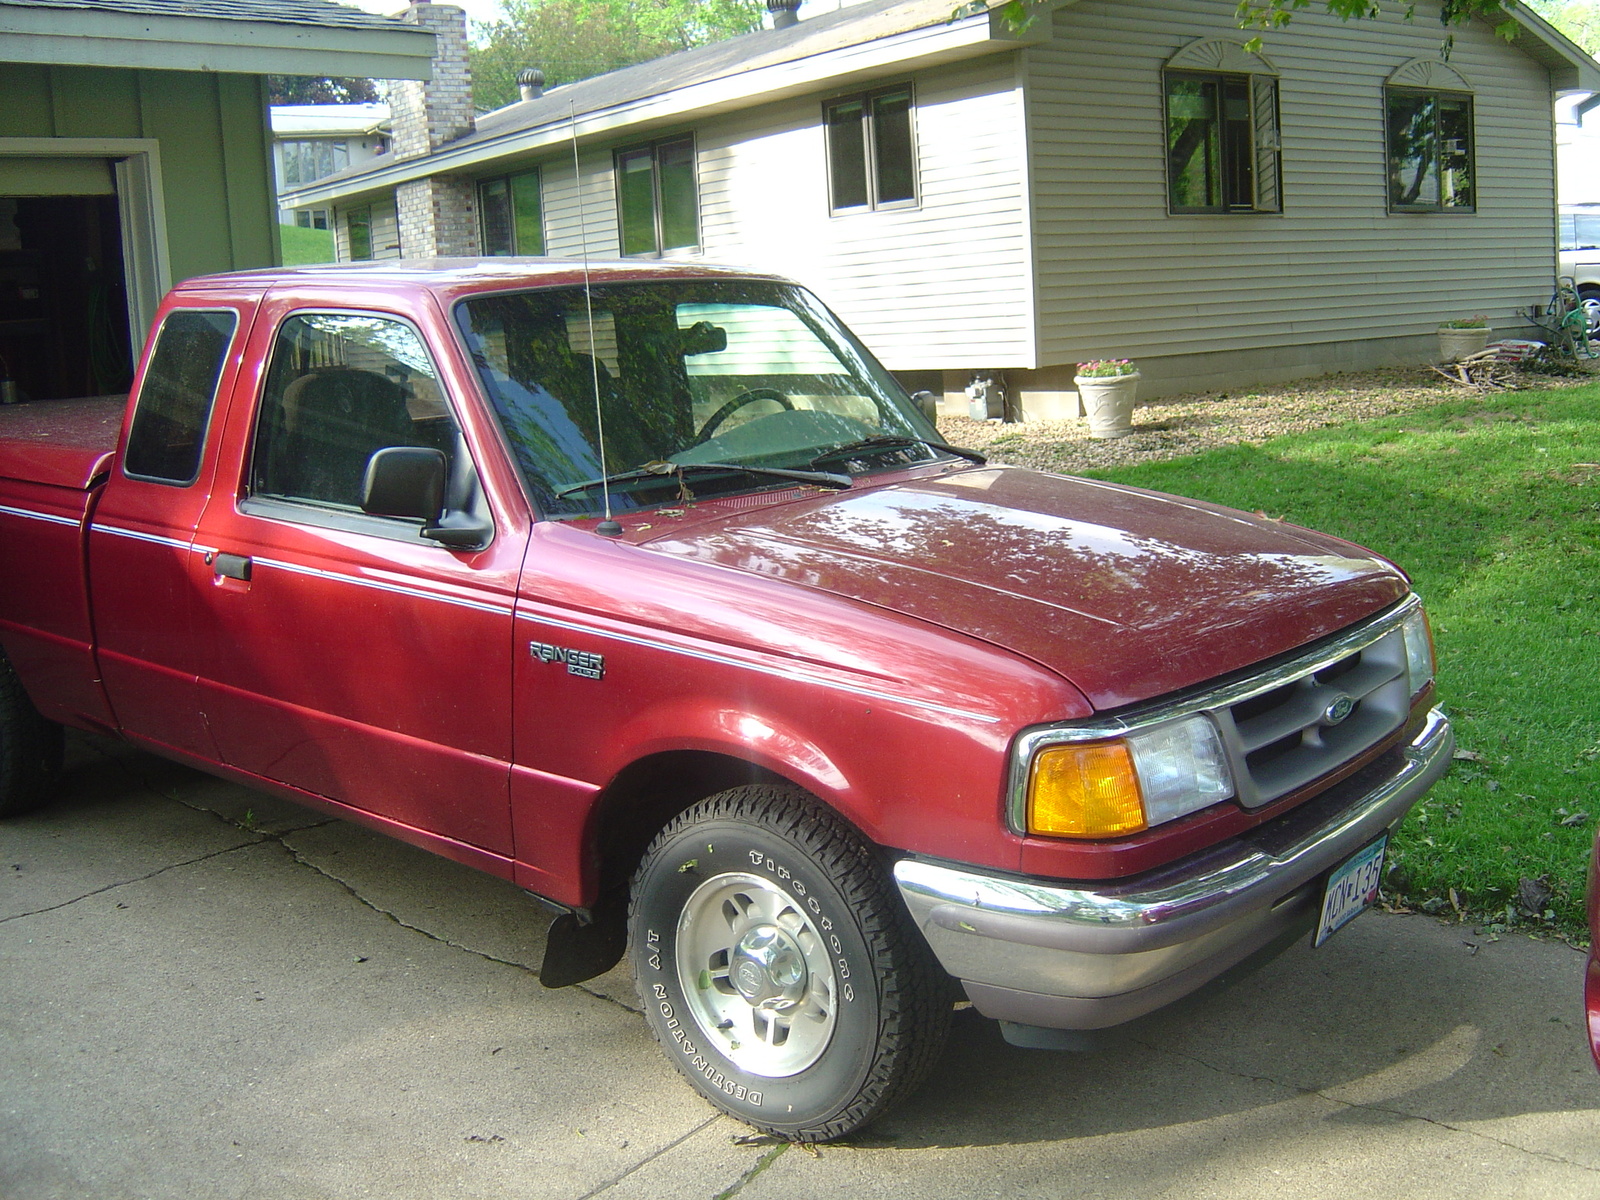 1997 Ford ranger extended cab review #3